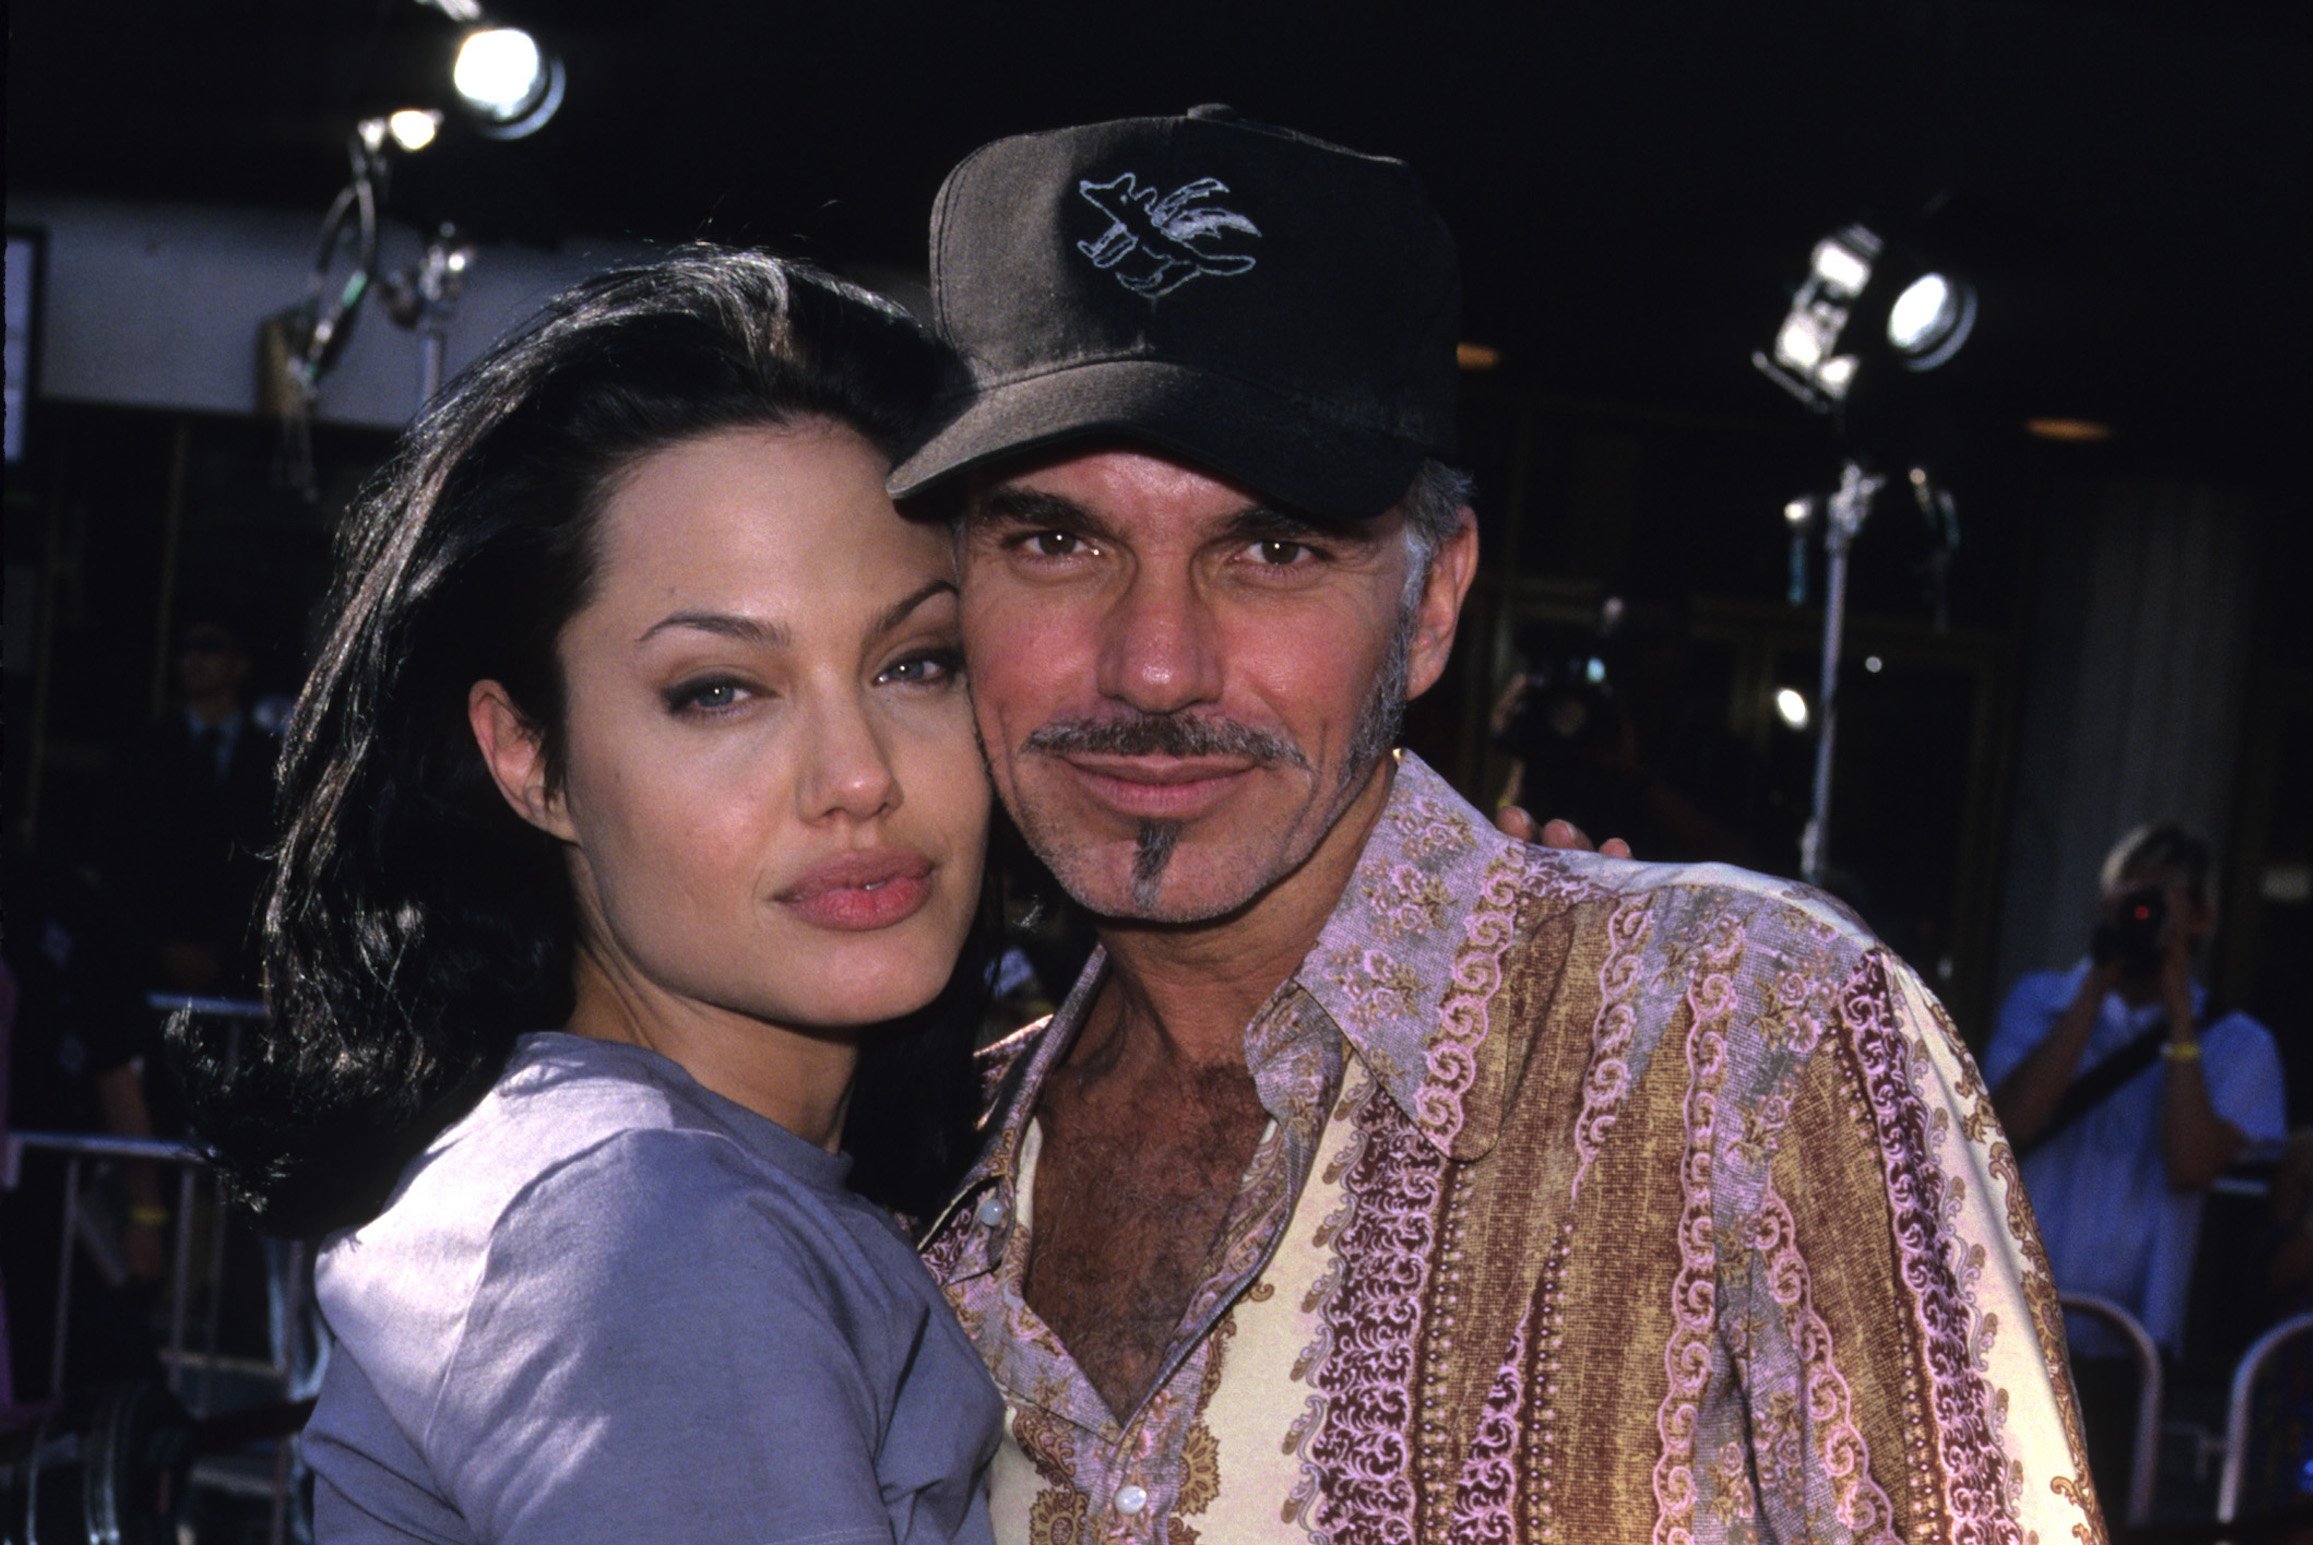 Angelina Jolie and Billy Bob Thornton Had Sex in the Car On the Way to the Gone In 60 Seconds Premiere